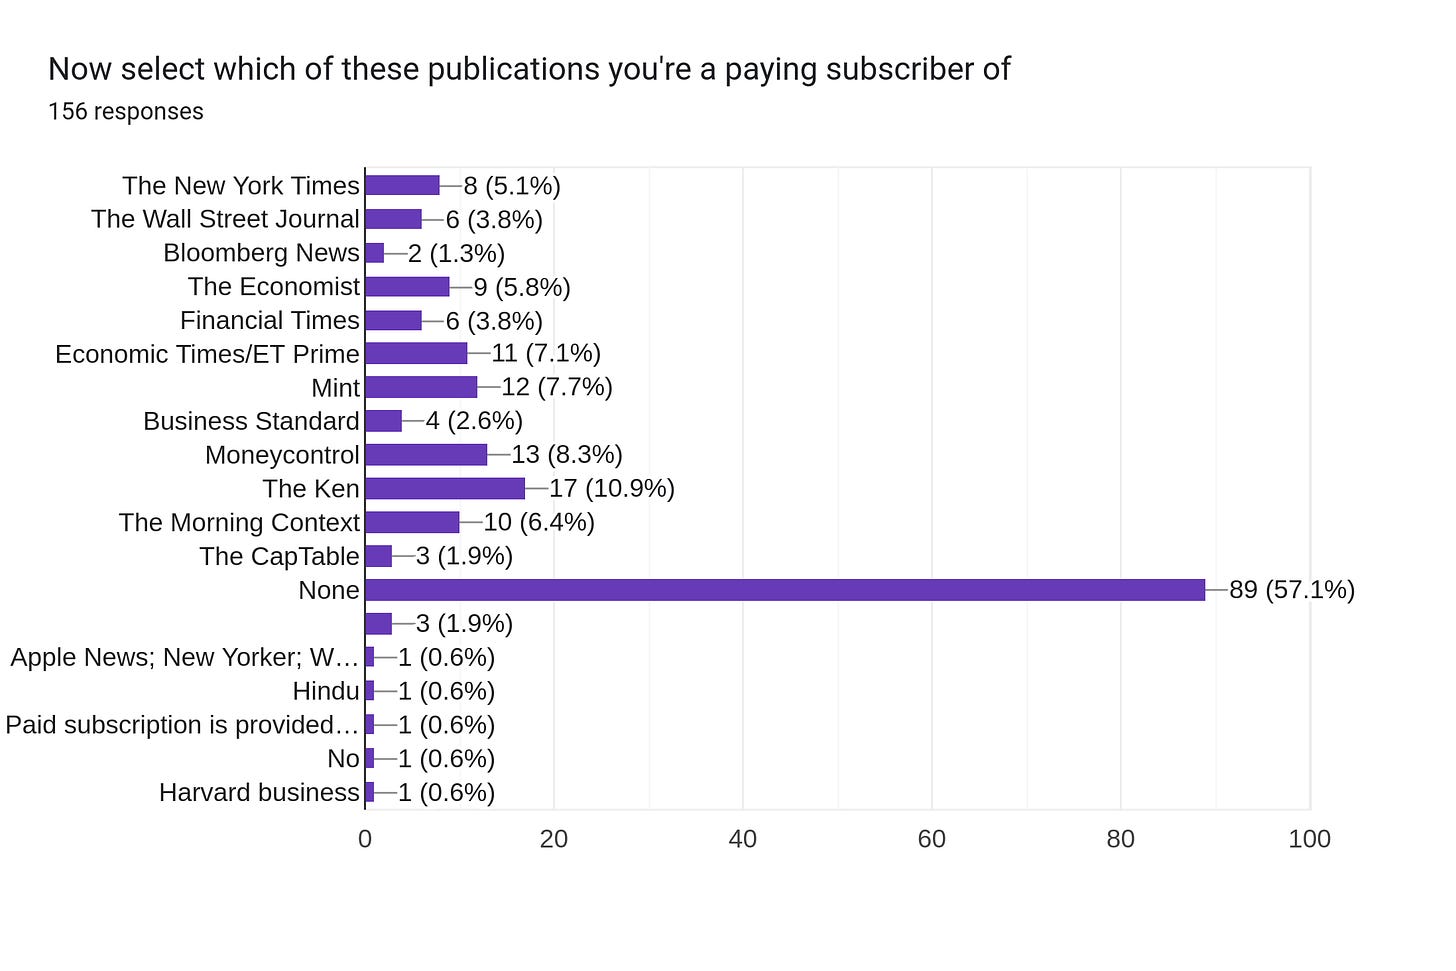 Forms response chart. Question title: Now select which of these publications you're a paying subscriber of
. Number of responses: 156 responses.